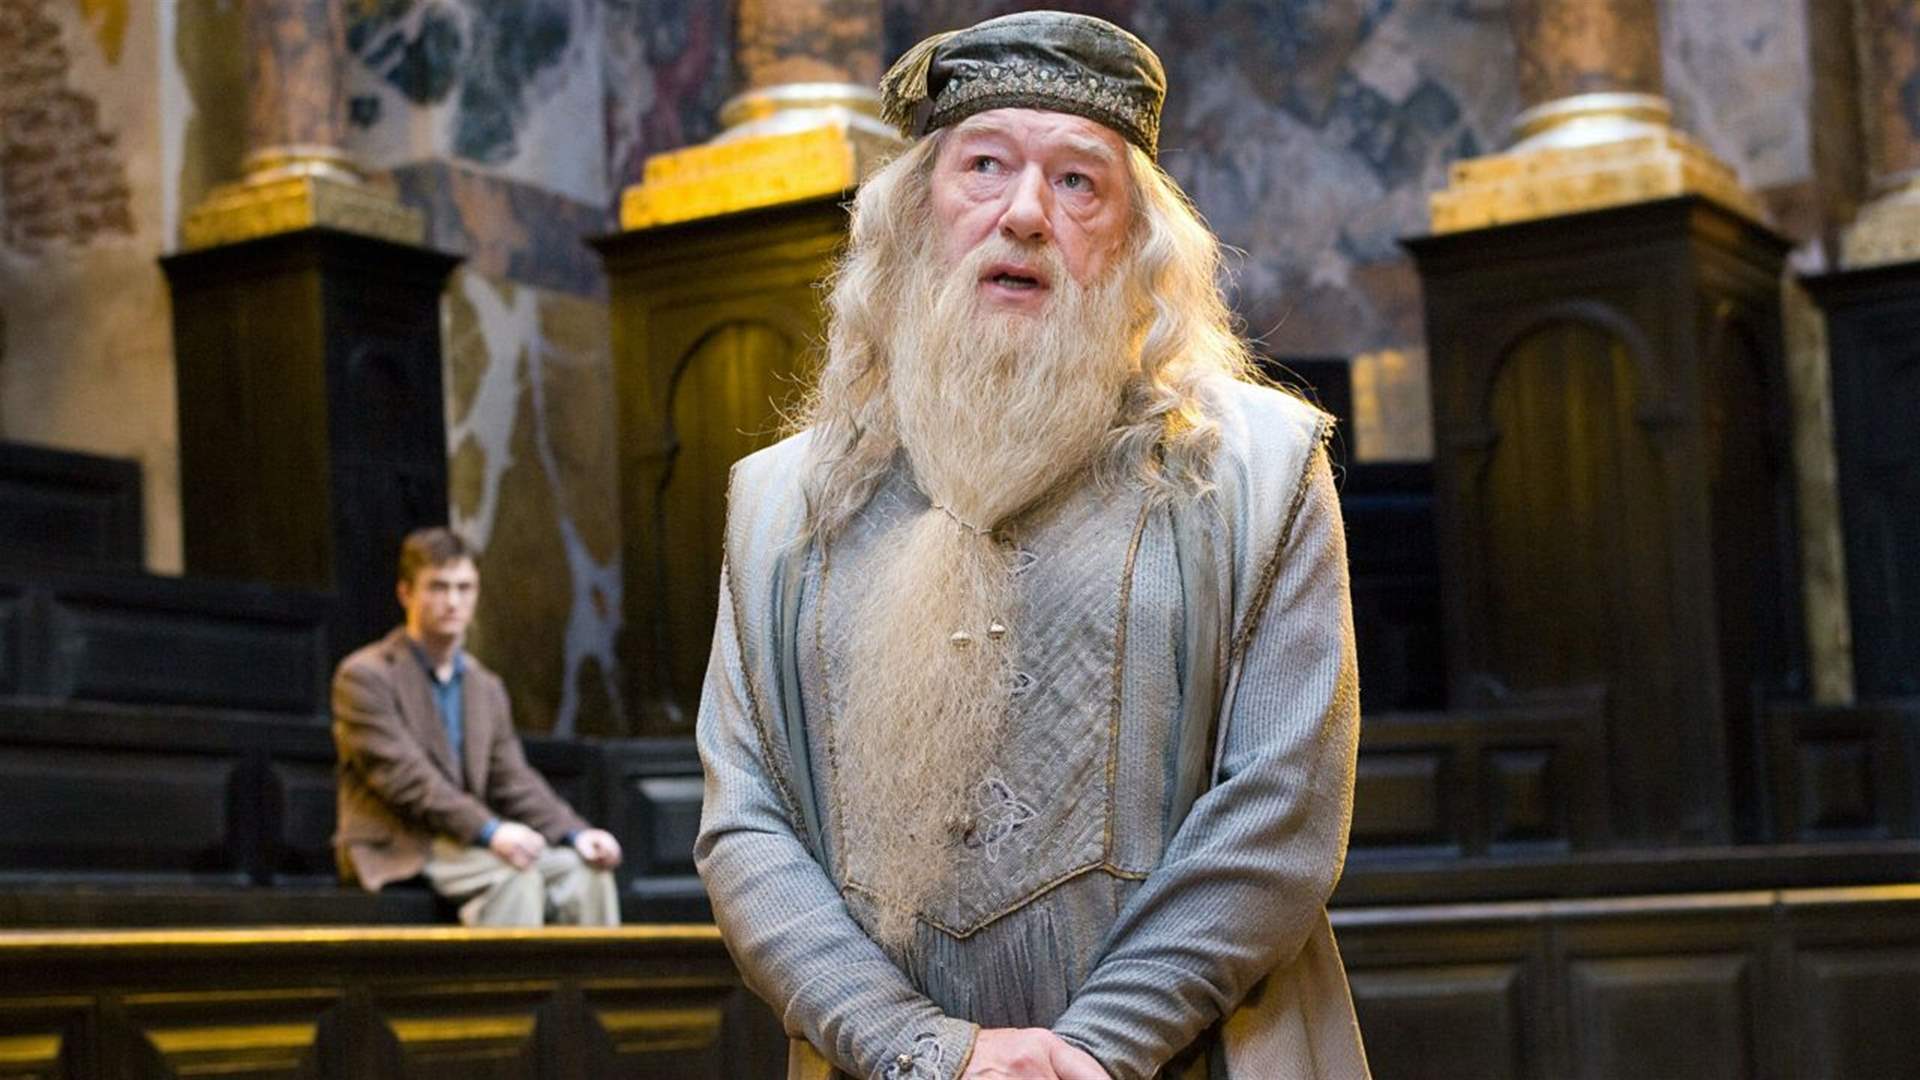 Actor Michael Gambon, the character of &quot;Dumbledore&quot; in the &quot;Harry Potter&quot; series, dies at 82